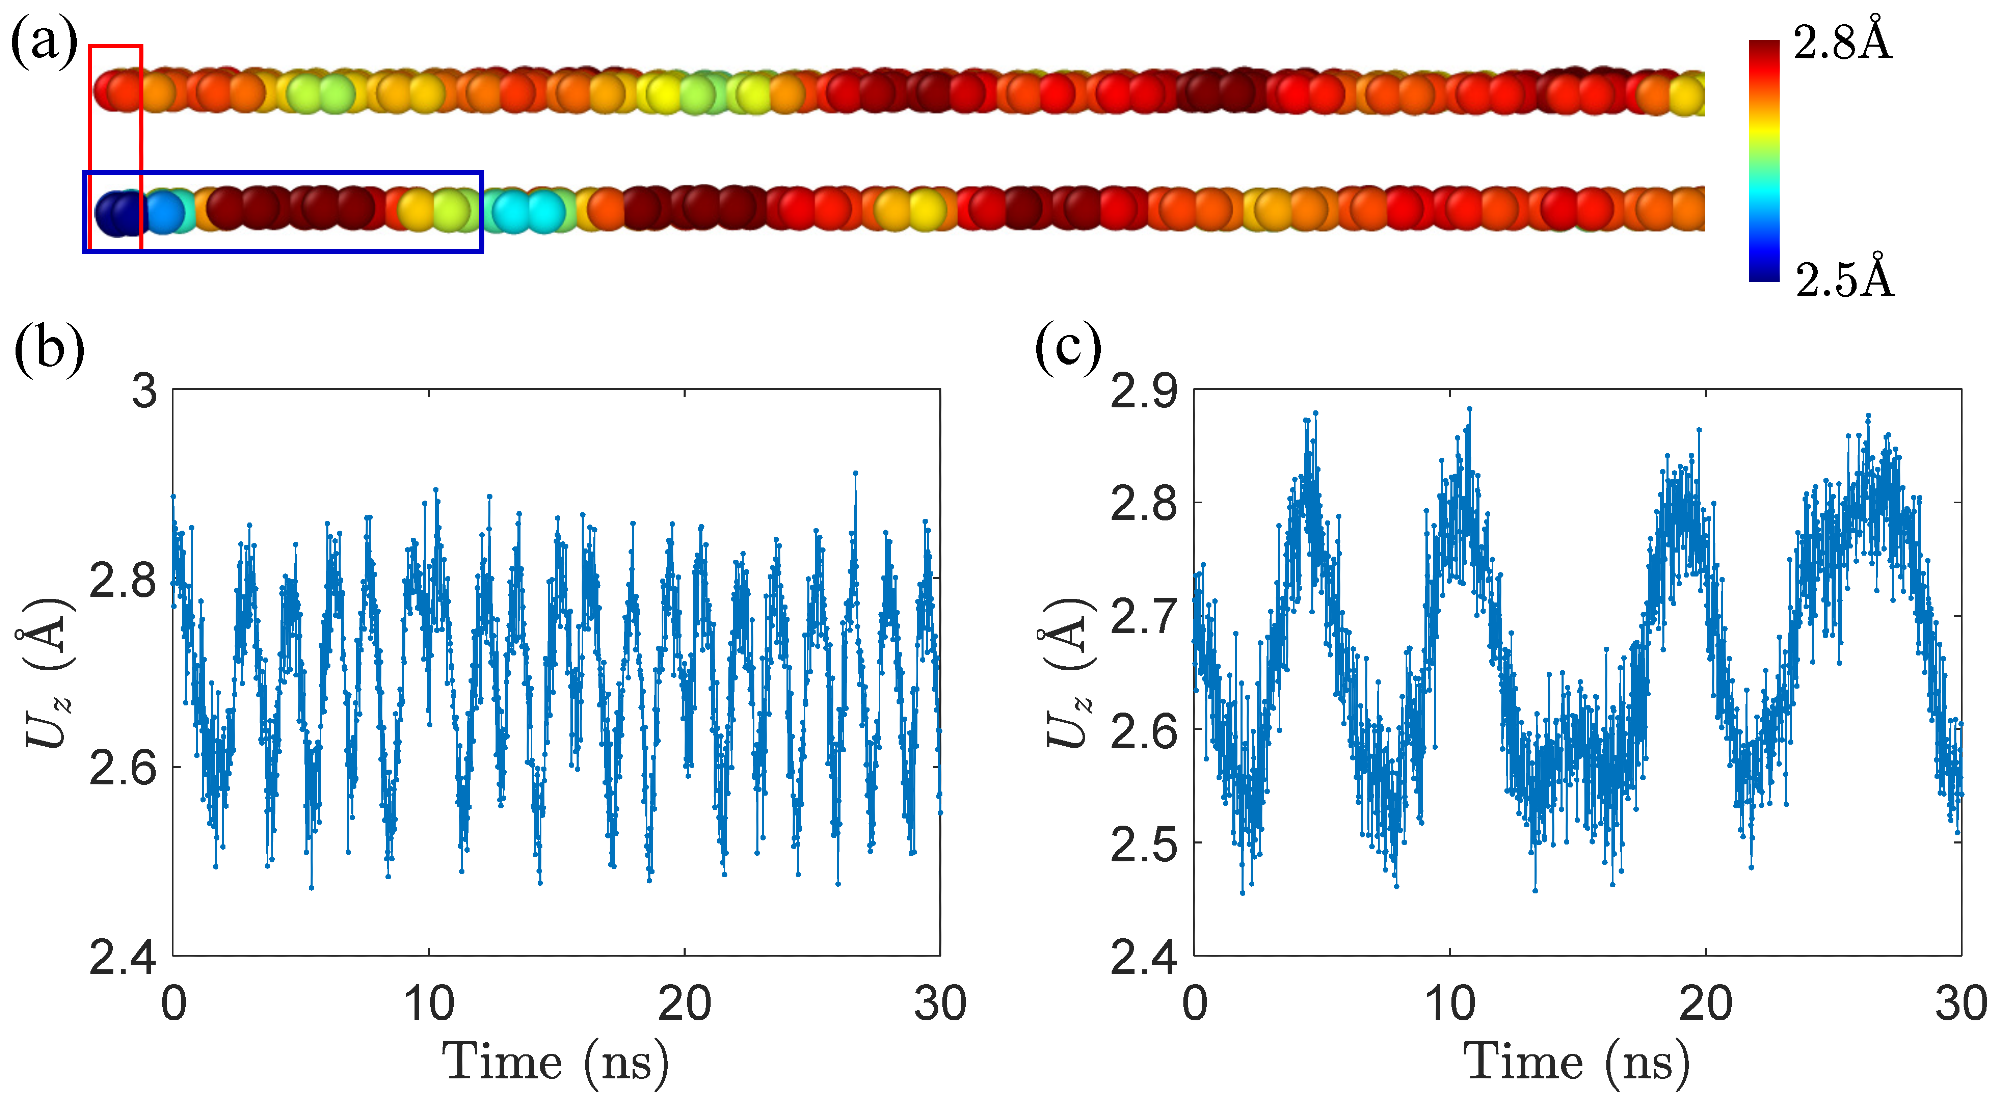 The sinking of tail atoms. (a) two morphologies of tail atoms in GNRs under horizontal drag. The upper one is in the sliding process, while the lower one is in the peeling process. The color bar shows the distance from the substrate. We compute the LJ potential energy of atoms in the blue box that forms a moiré pattern. (b,c) variations of Uz of tail atom in a GNR with lx~ 20 nm. (b) vd = 0.2 m/s and Z0 = 10 Å, sliding behavior; (c) vd = 0.4 m/s and Z0 = 17.5 Å, peeling response.